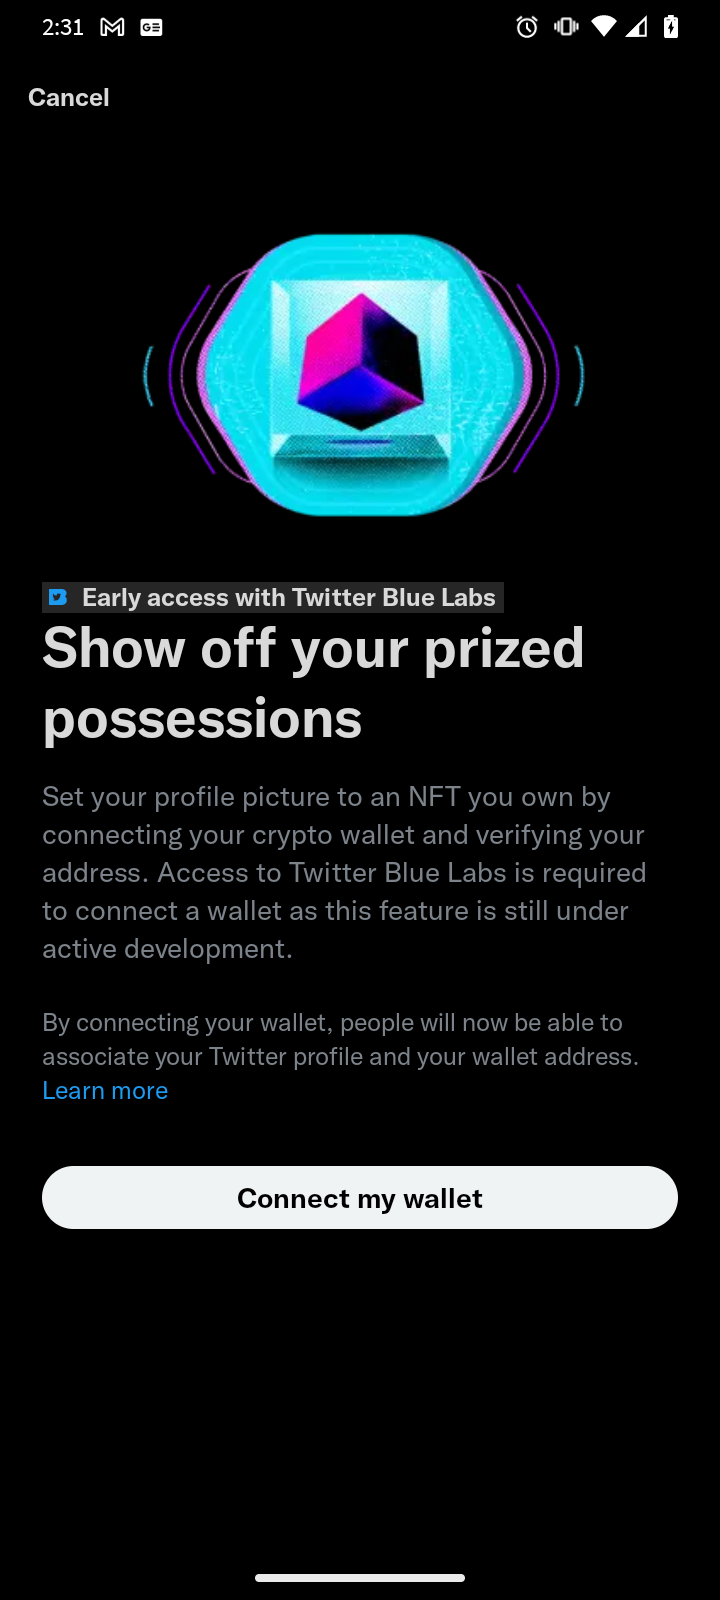 Information about NFT profile pictures on Twitter Blue